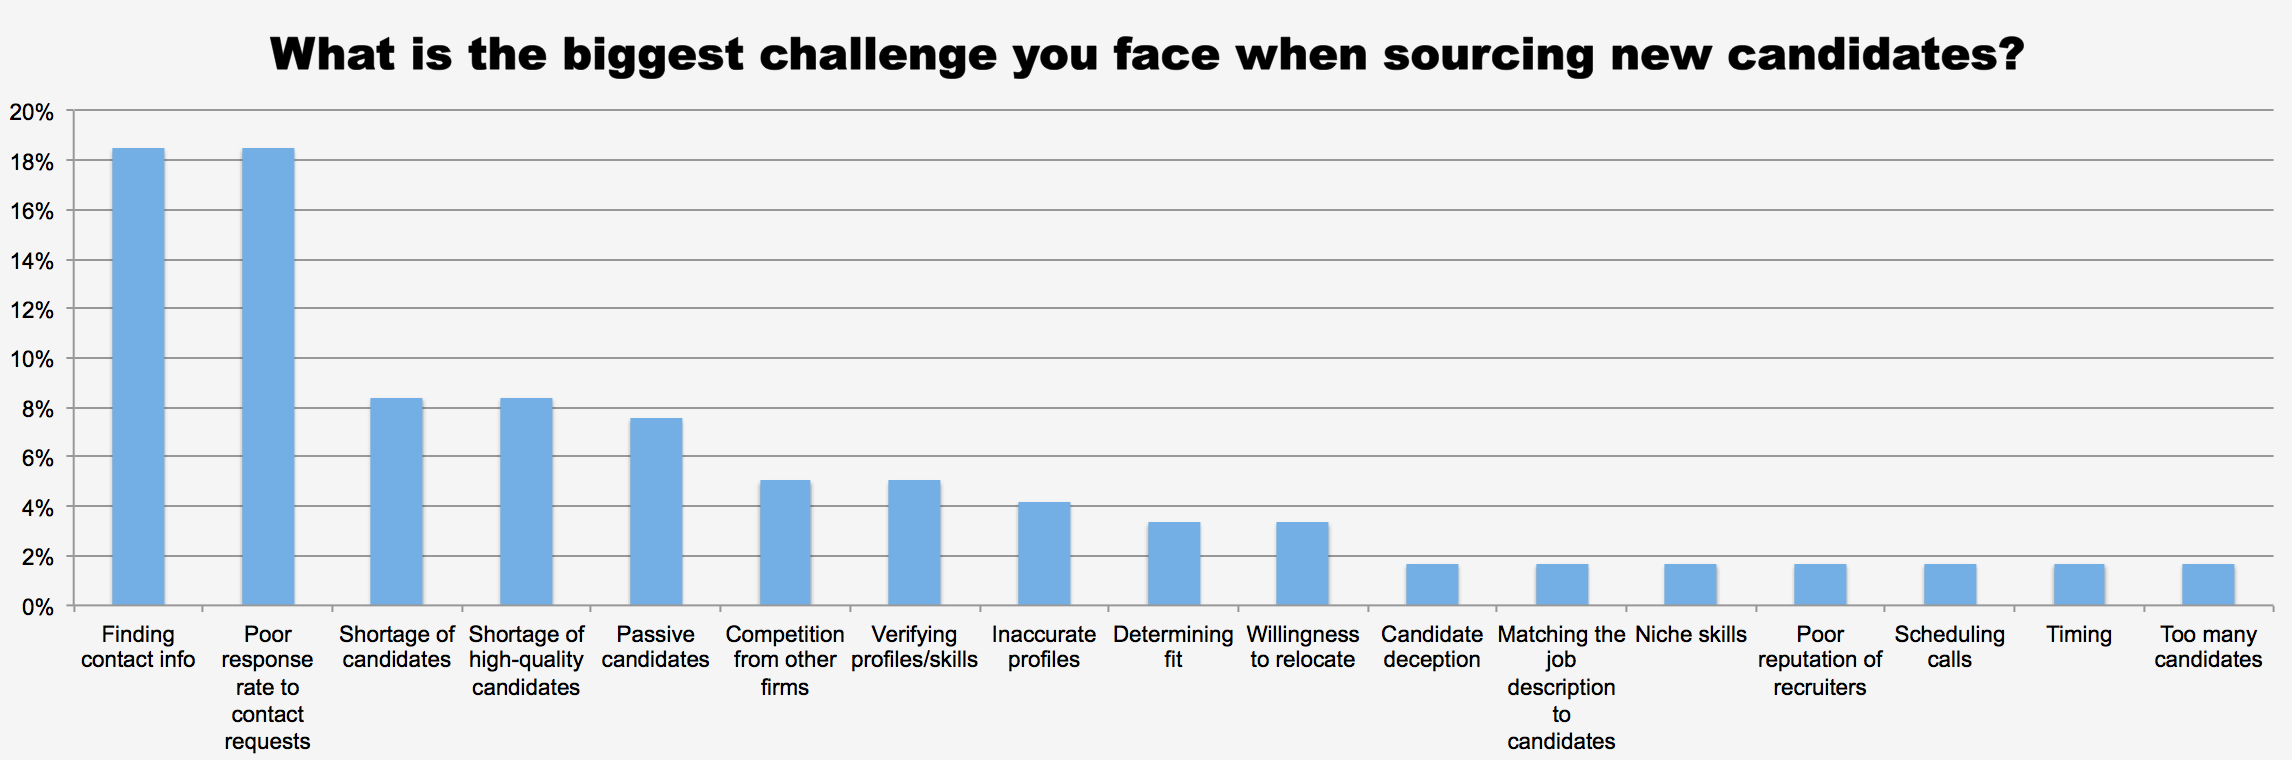 What is the biggest challenge you face when sourcing new candidates?